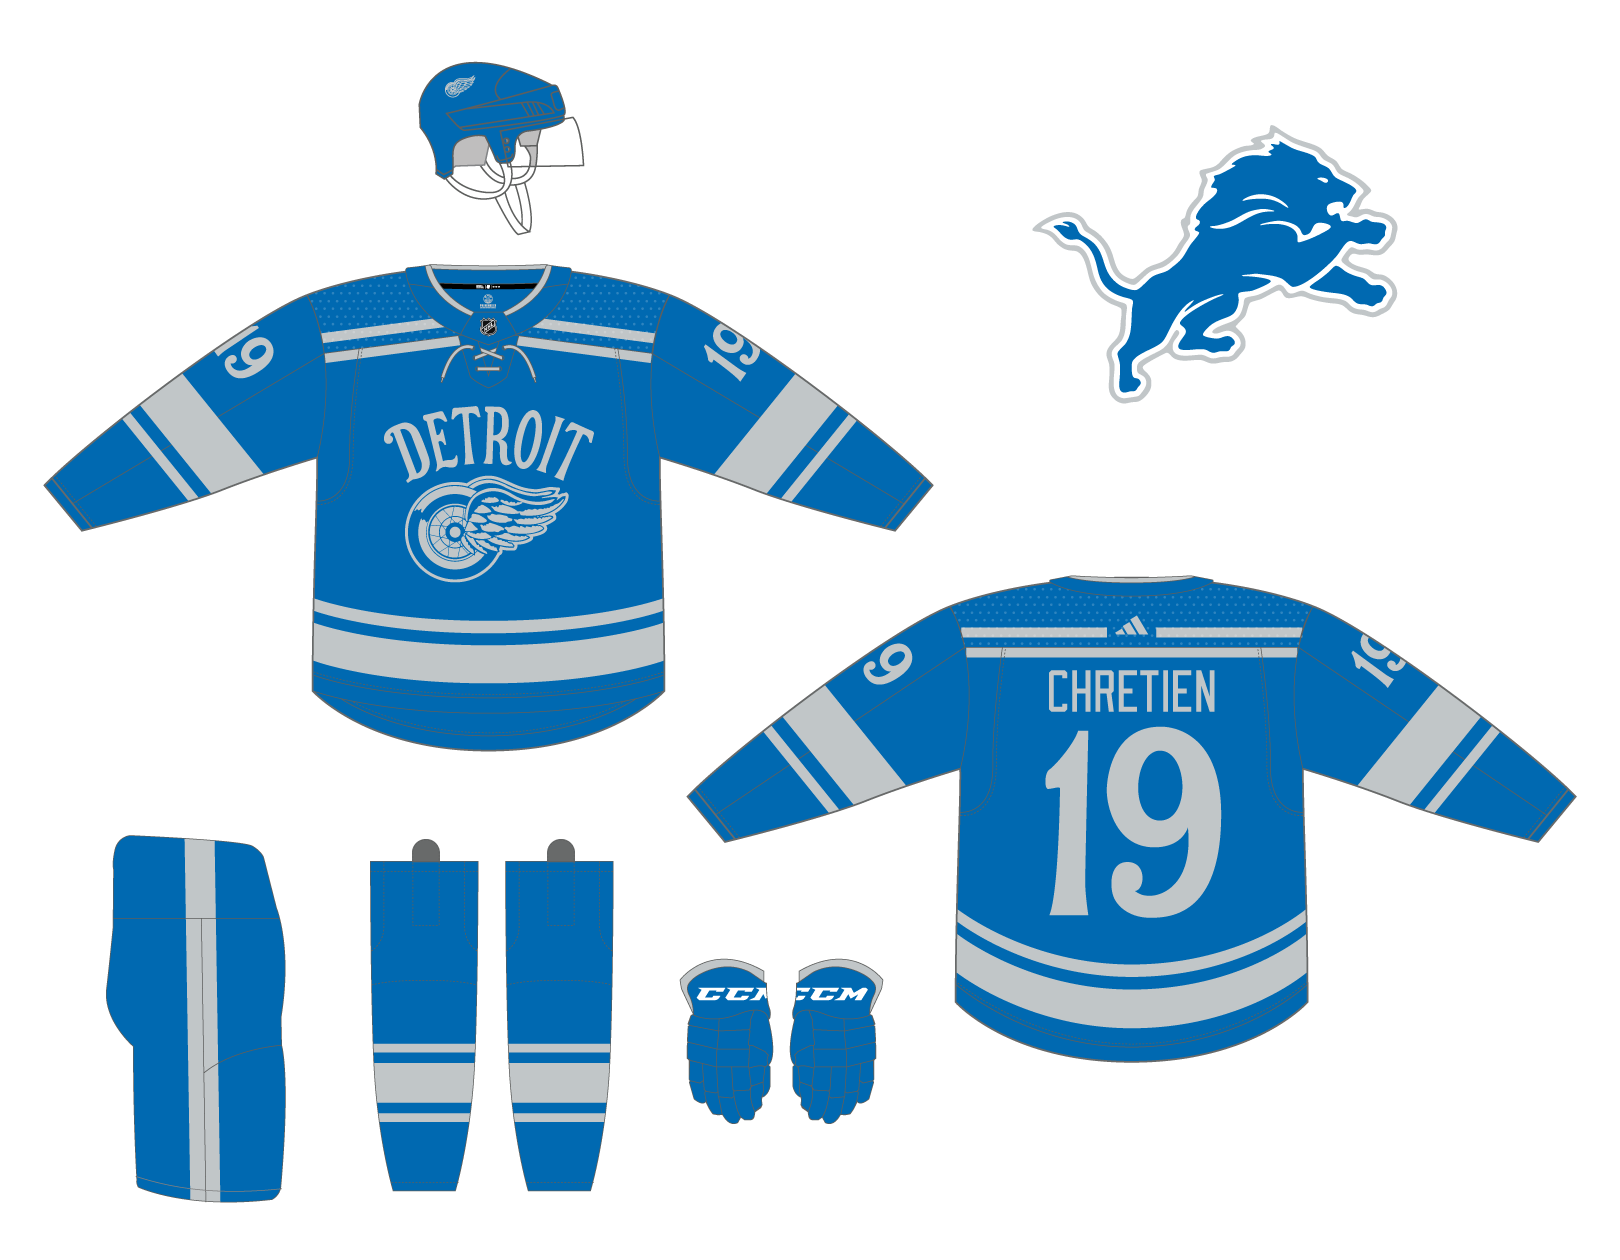 The long-awaited Lions x Red Wings jersey swap (via TheGraphicGod